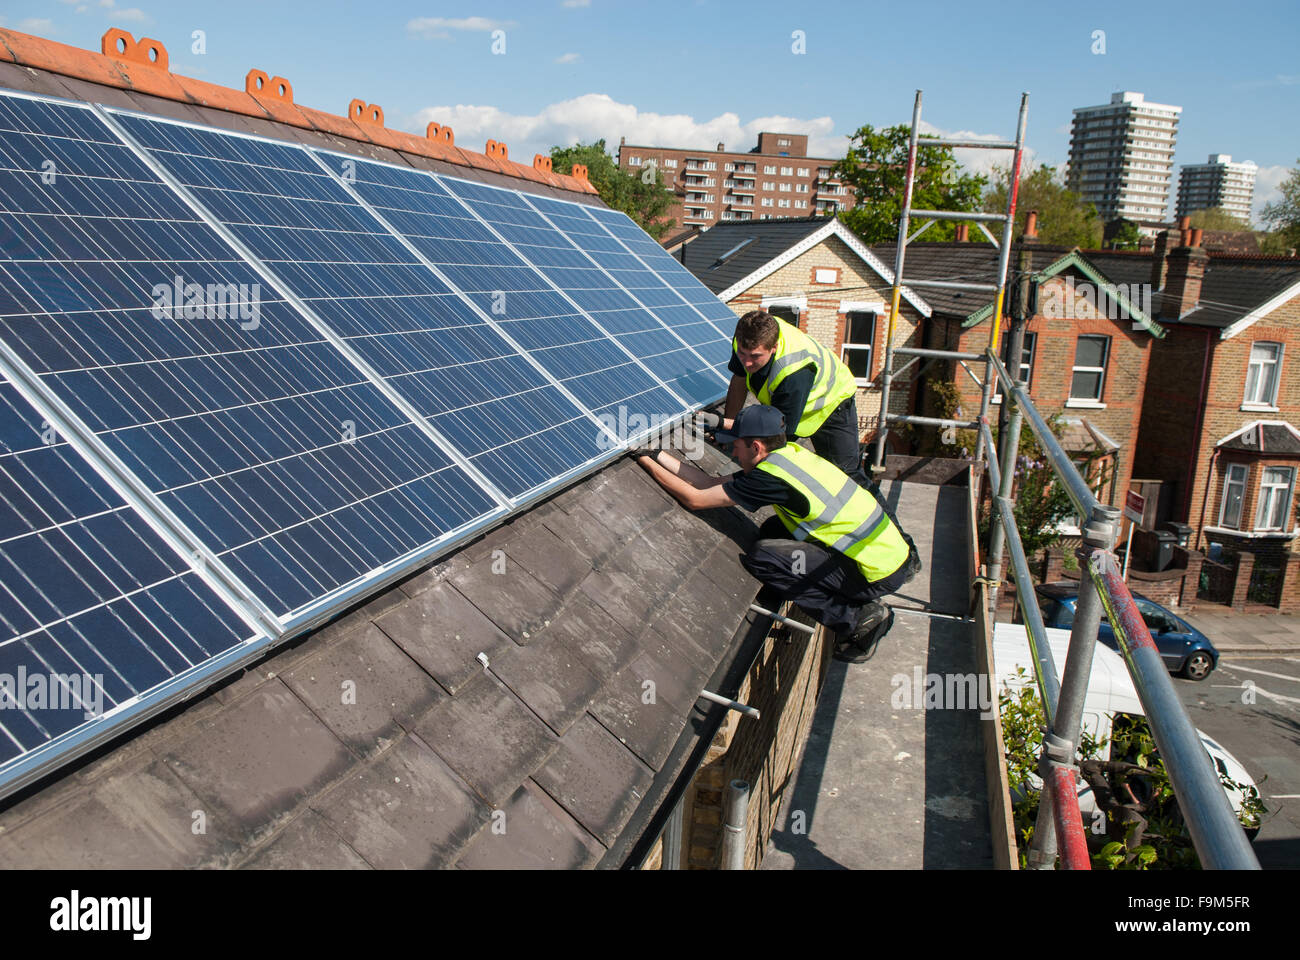 Workers install photovoltaic solar panels on the slate roof of a Victorian house in London, England. Stock Photo